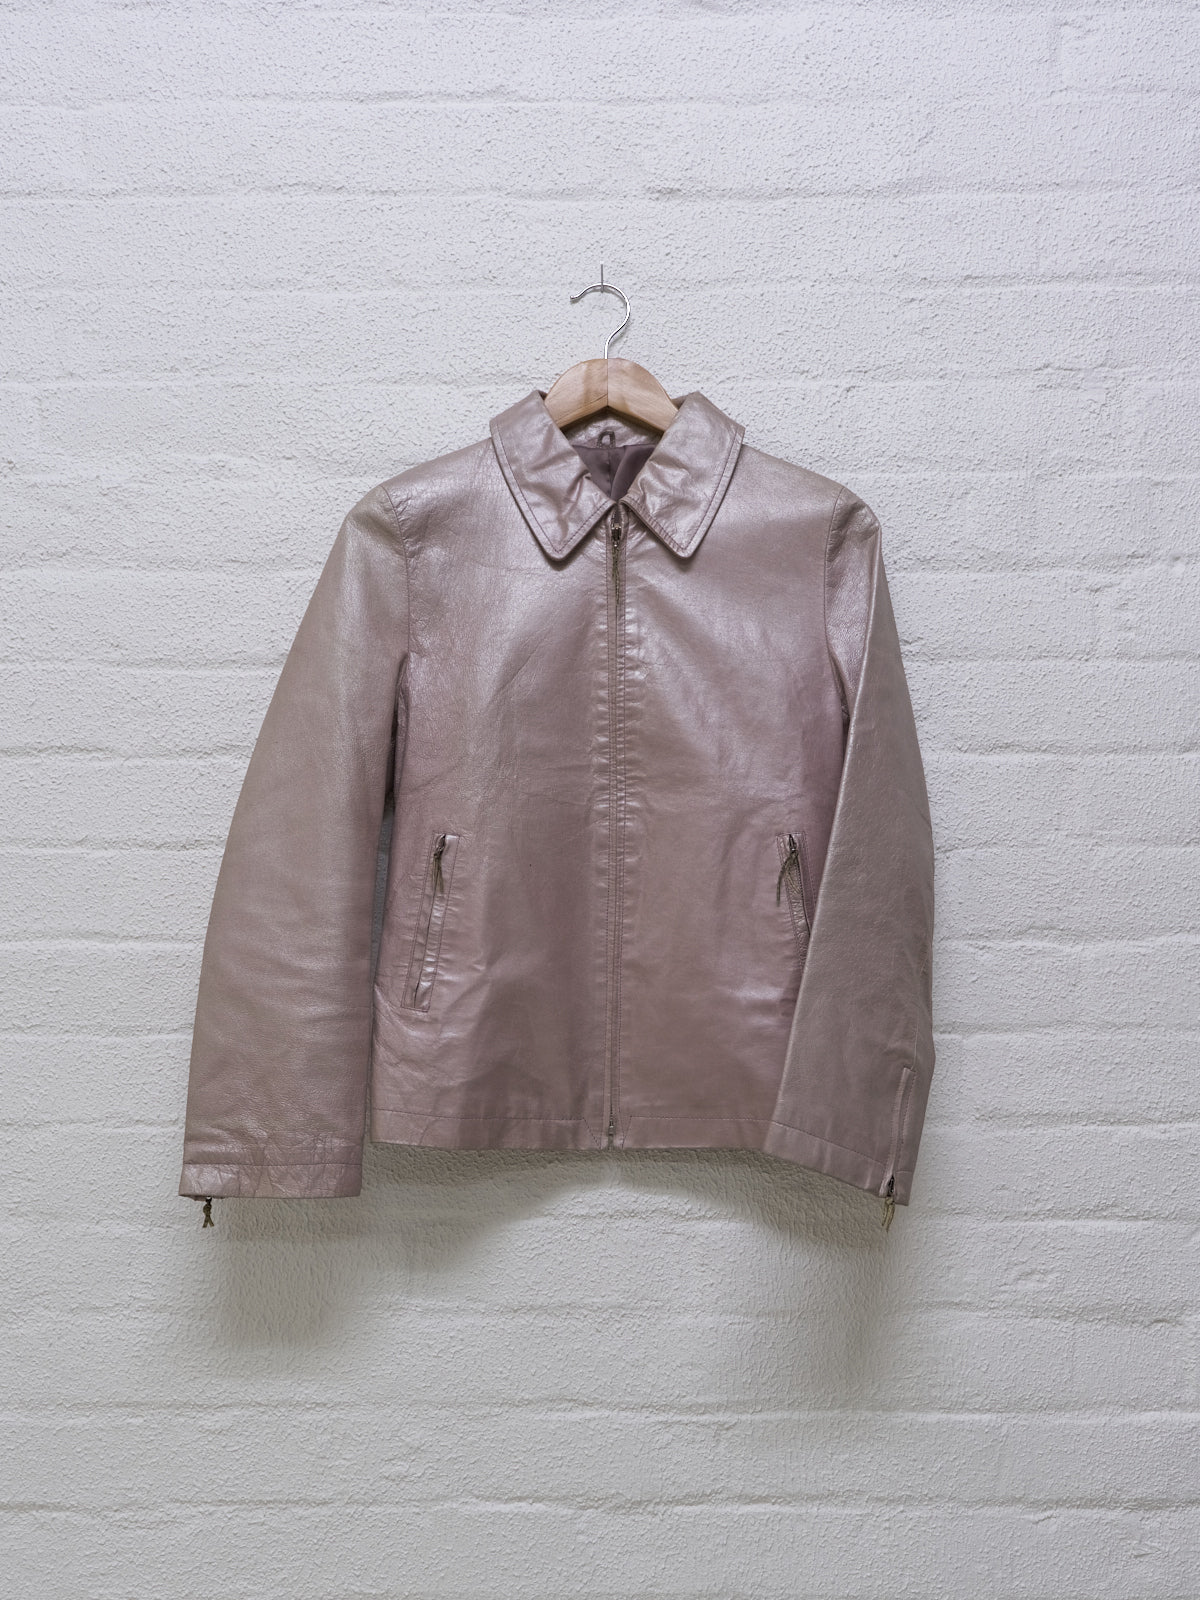 APC AW1994 dusty pink leather zip jacket - womens S